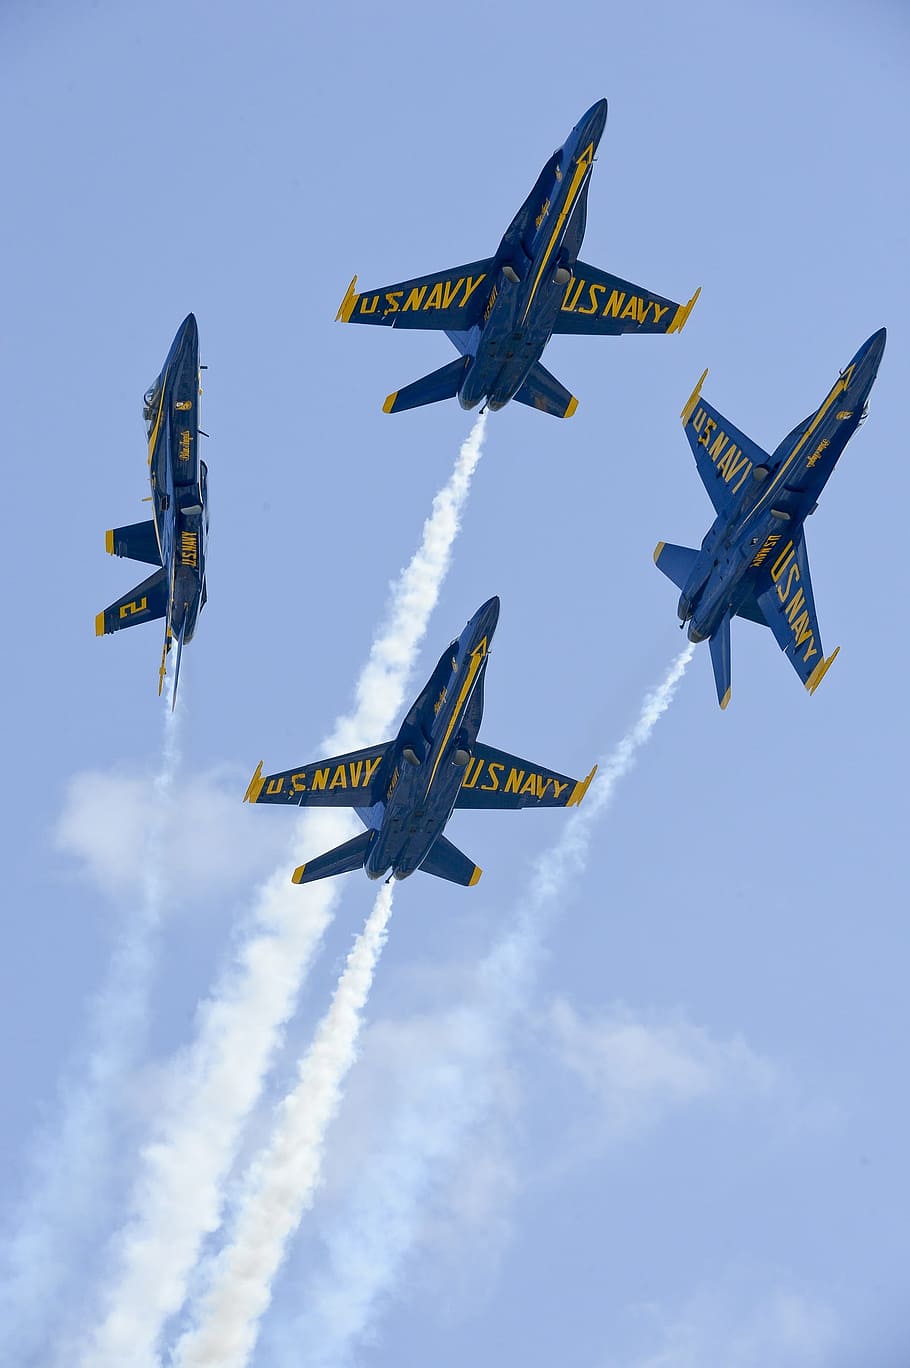 four, blue, jet fighters, blue angels, navy, precision, planes, training, sortie, maneuvers